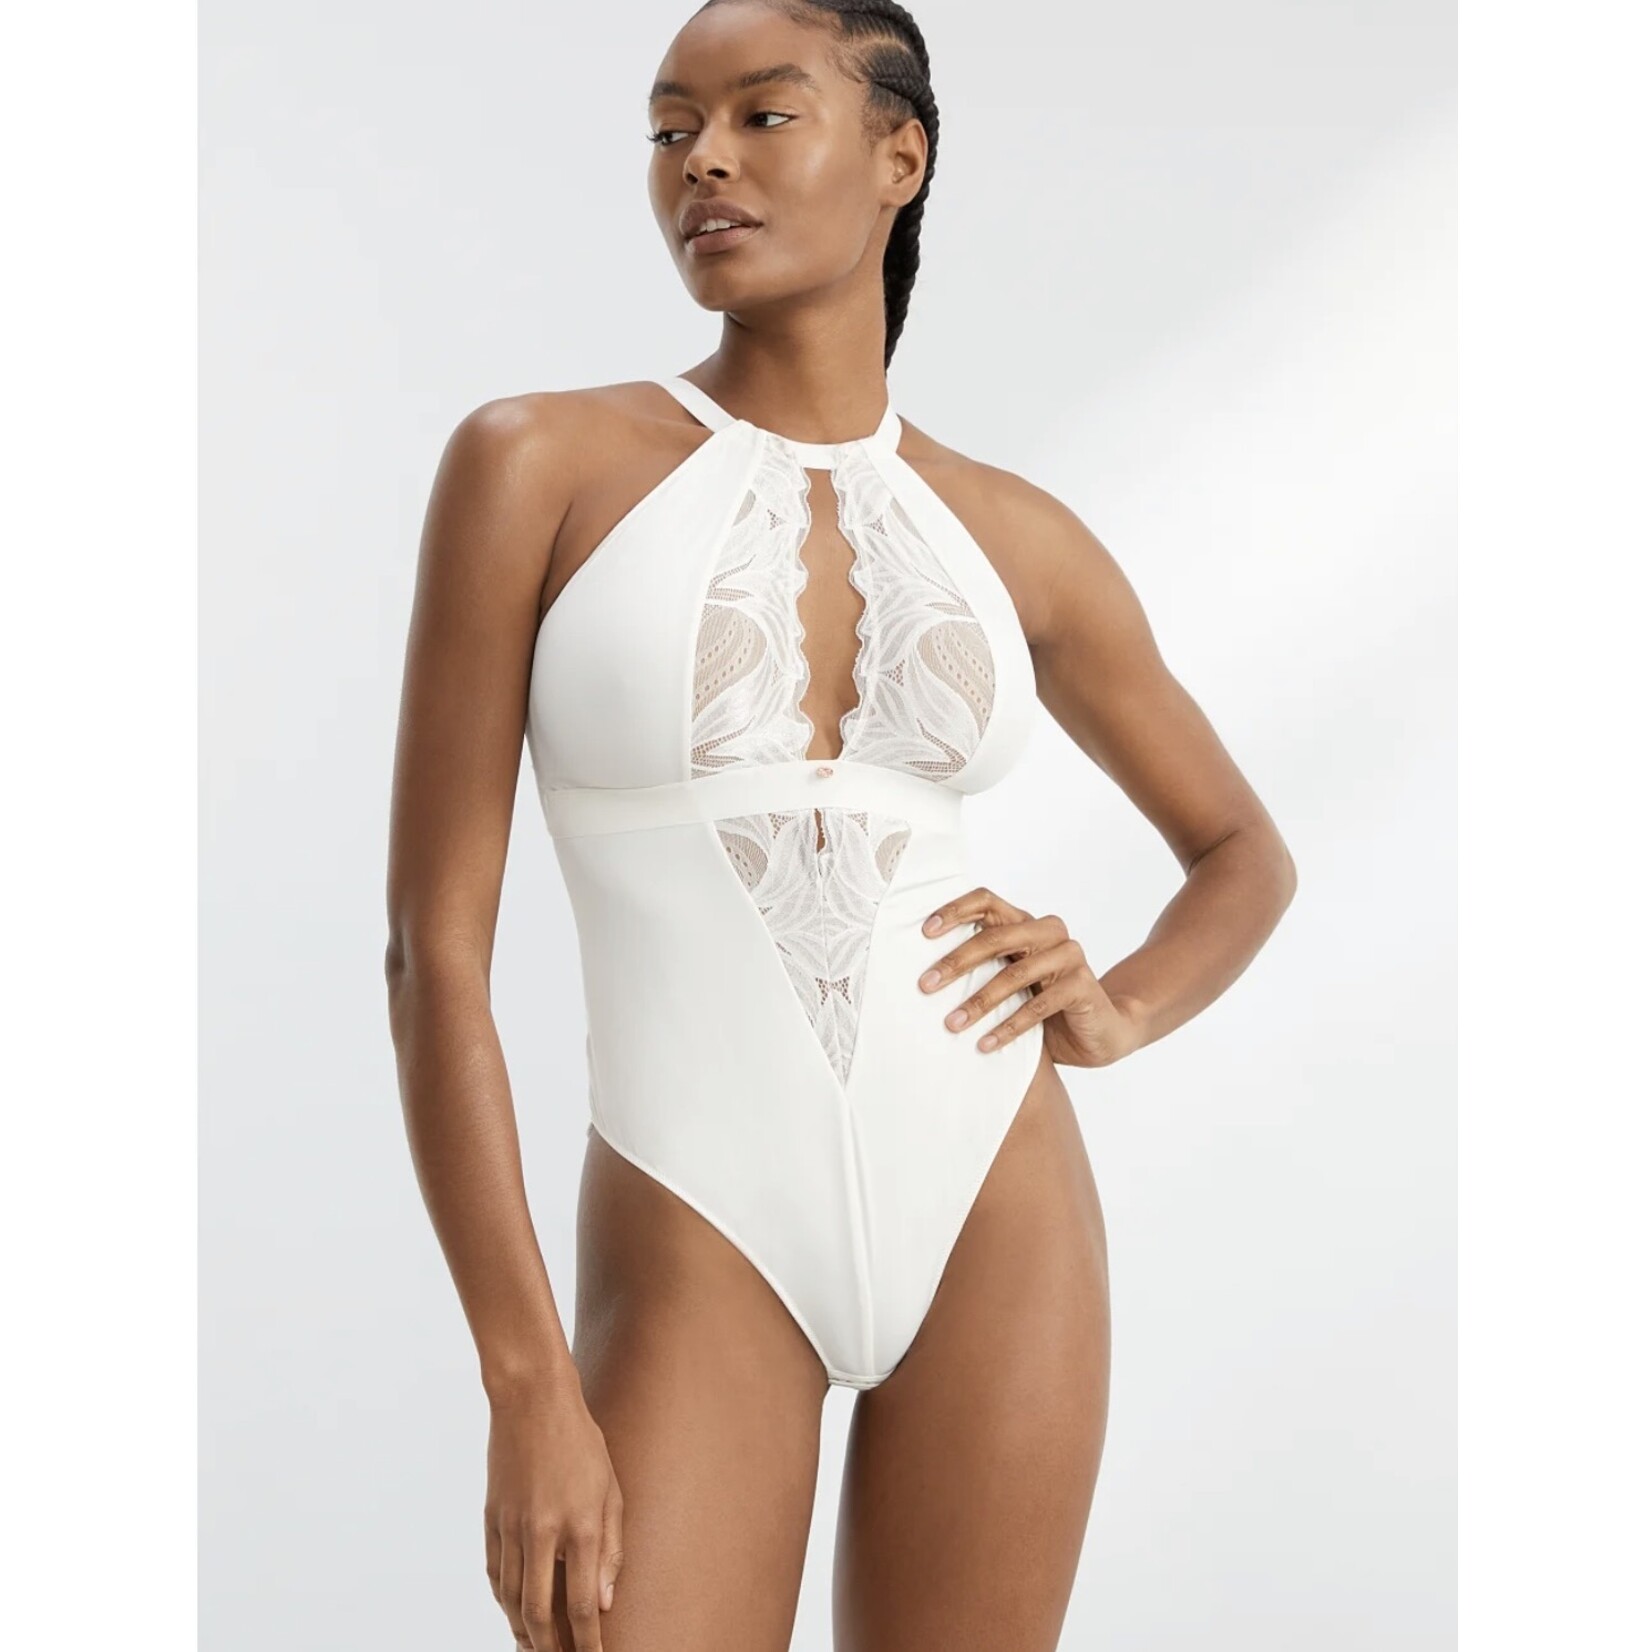 Curvy Kate Scatilly Indulgence Lace Body Suit